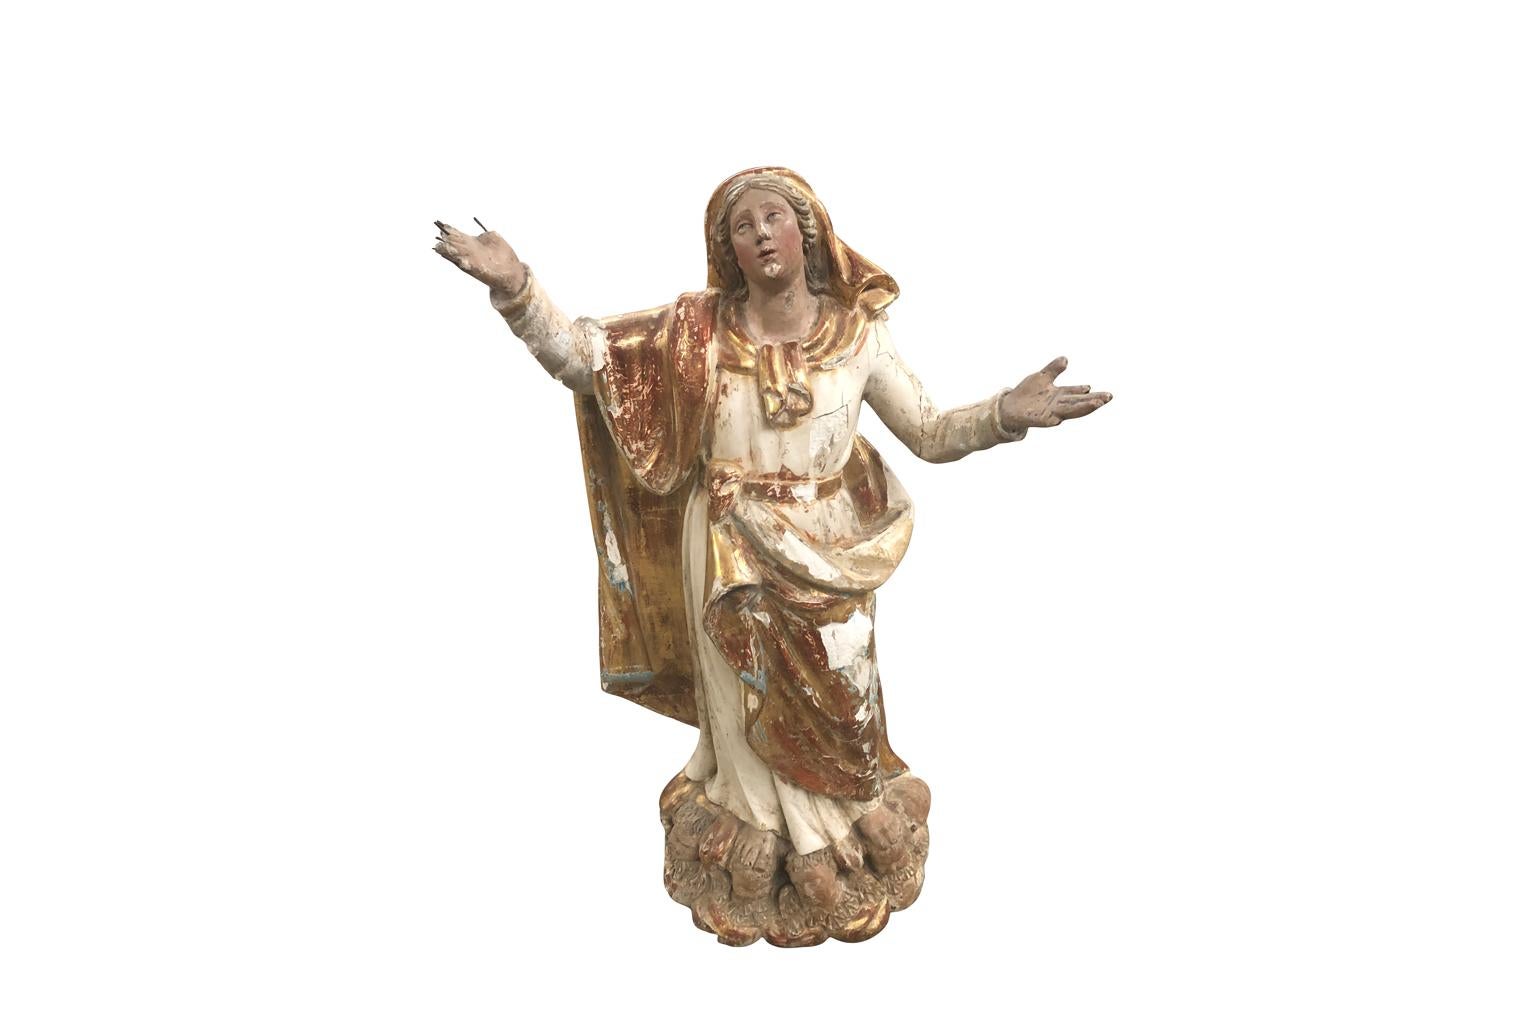 A very beautiful French 18th century Madonna statue as the assumption. Beautifully crafted from hand carved wood finished in polychrome and gilt. Exquisite features.